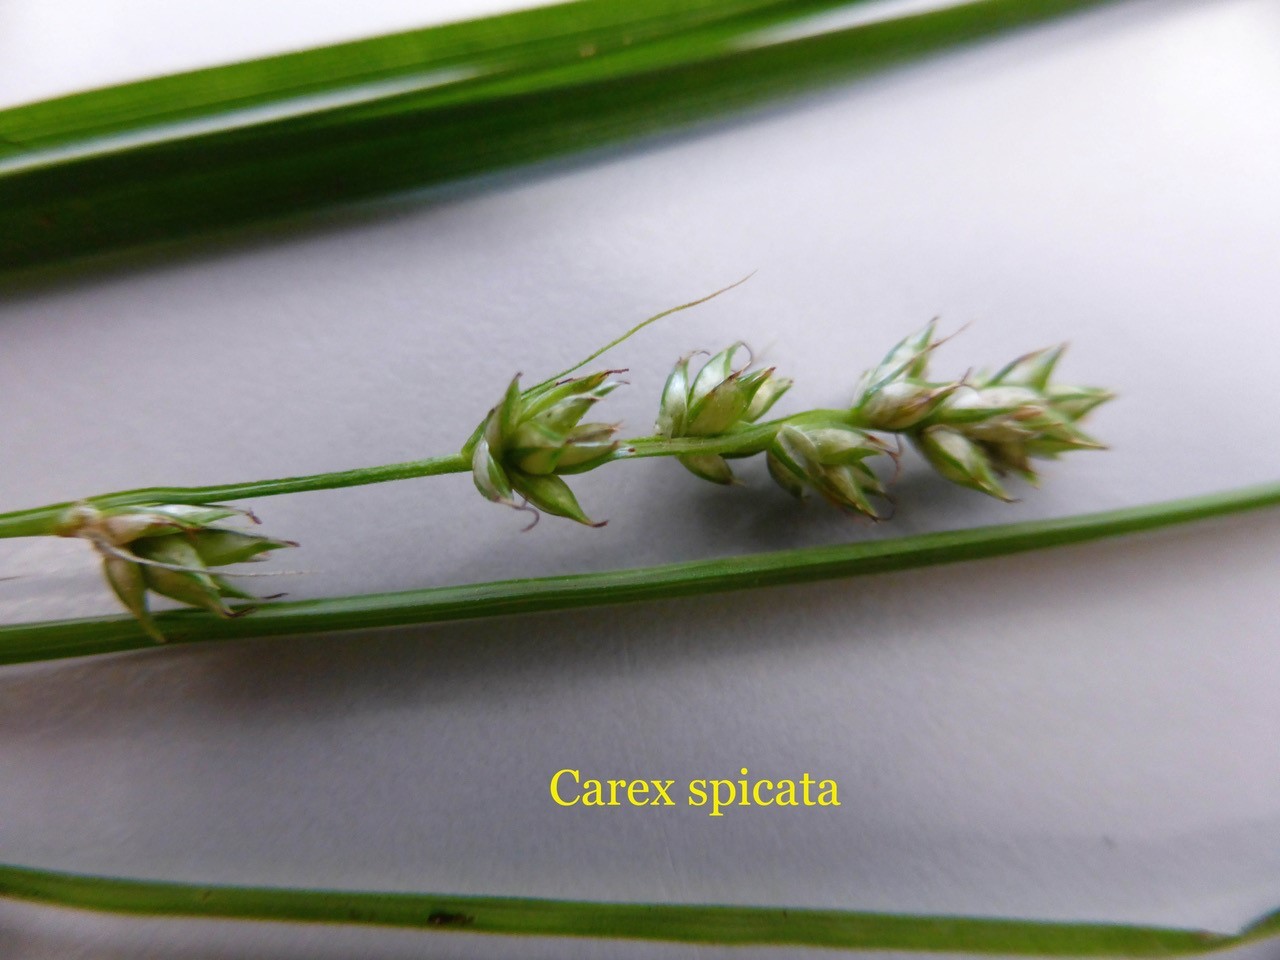 Spiked Sedge (Carex spicata), Colemere